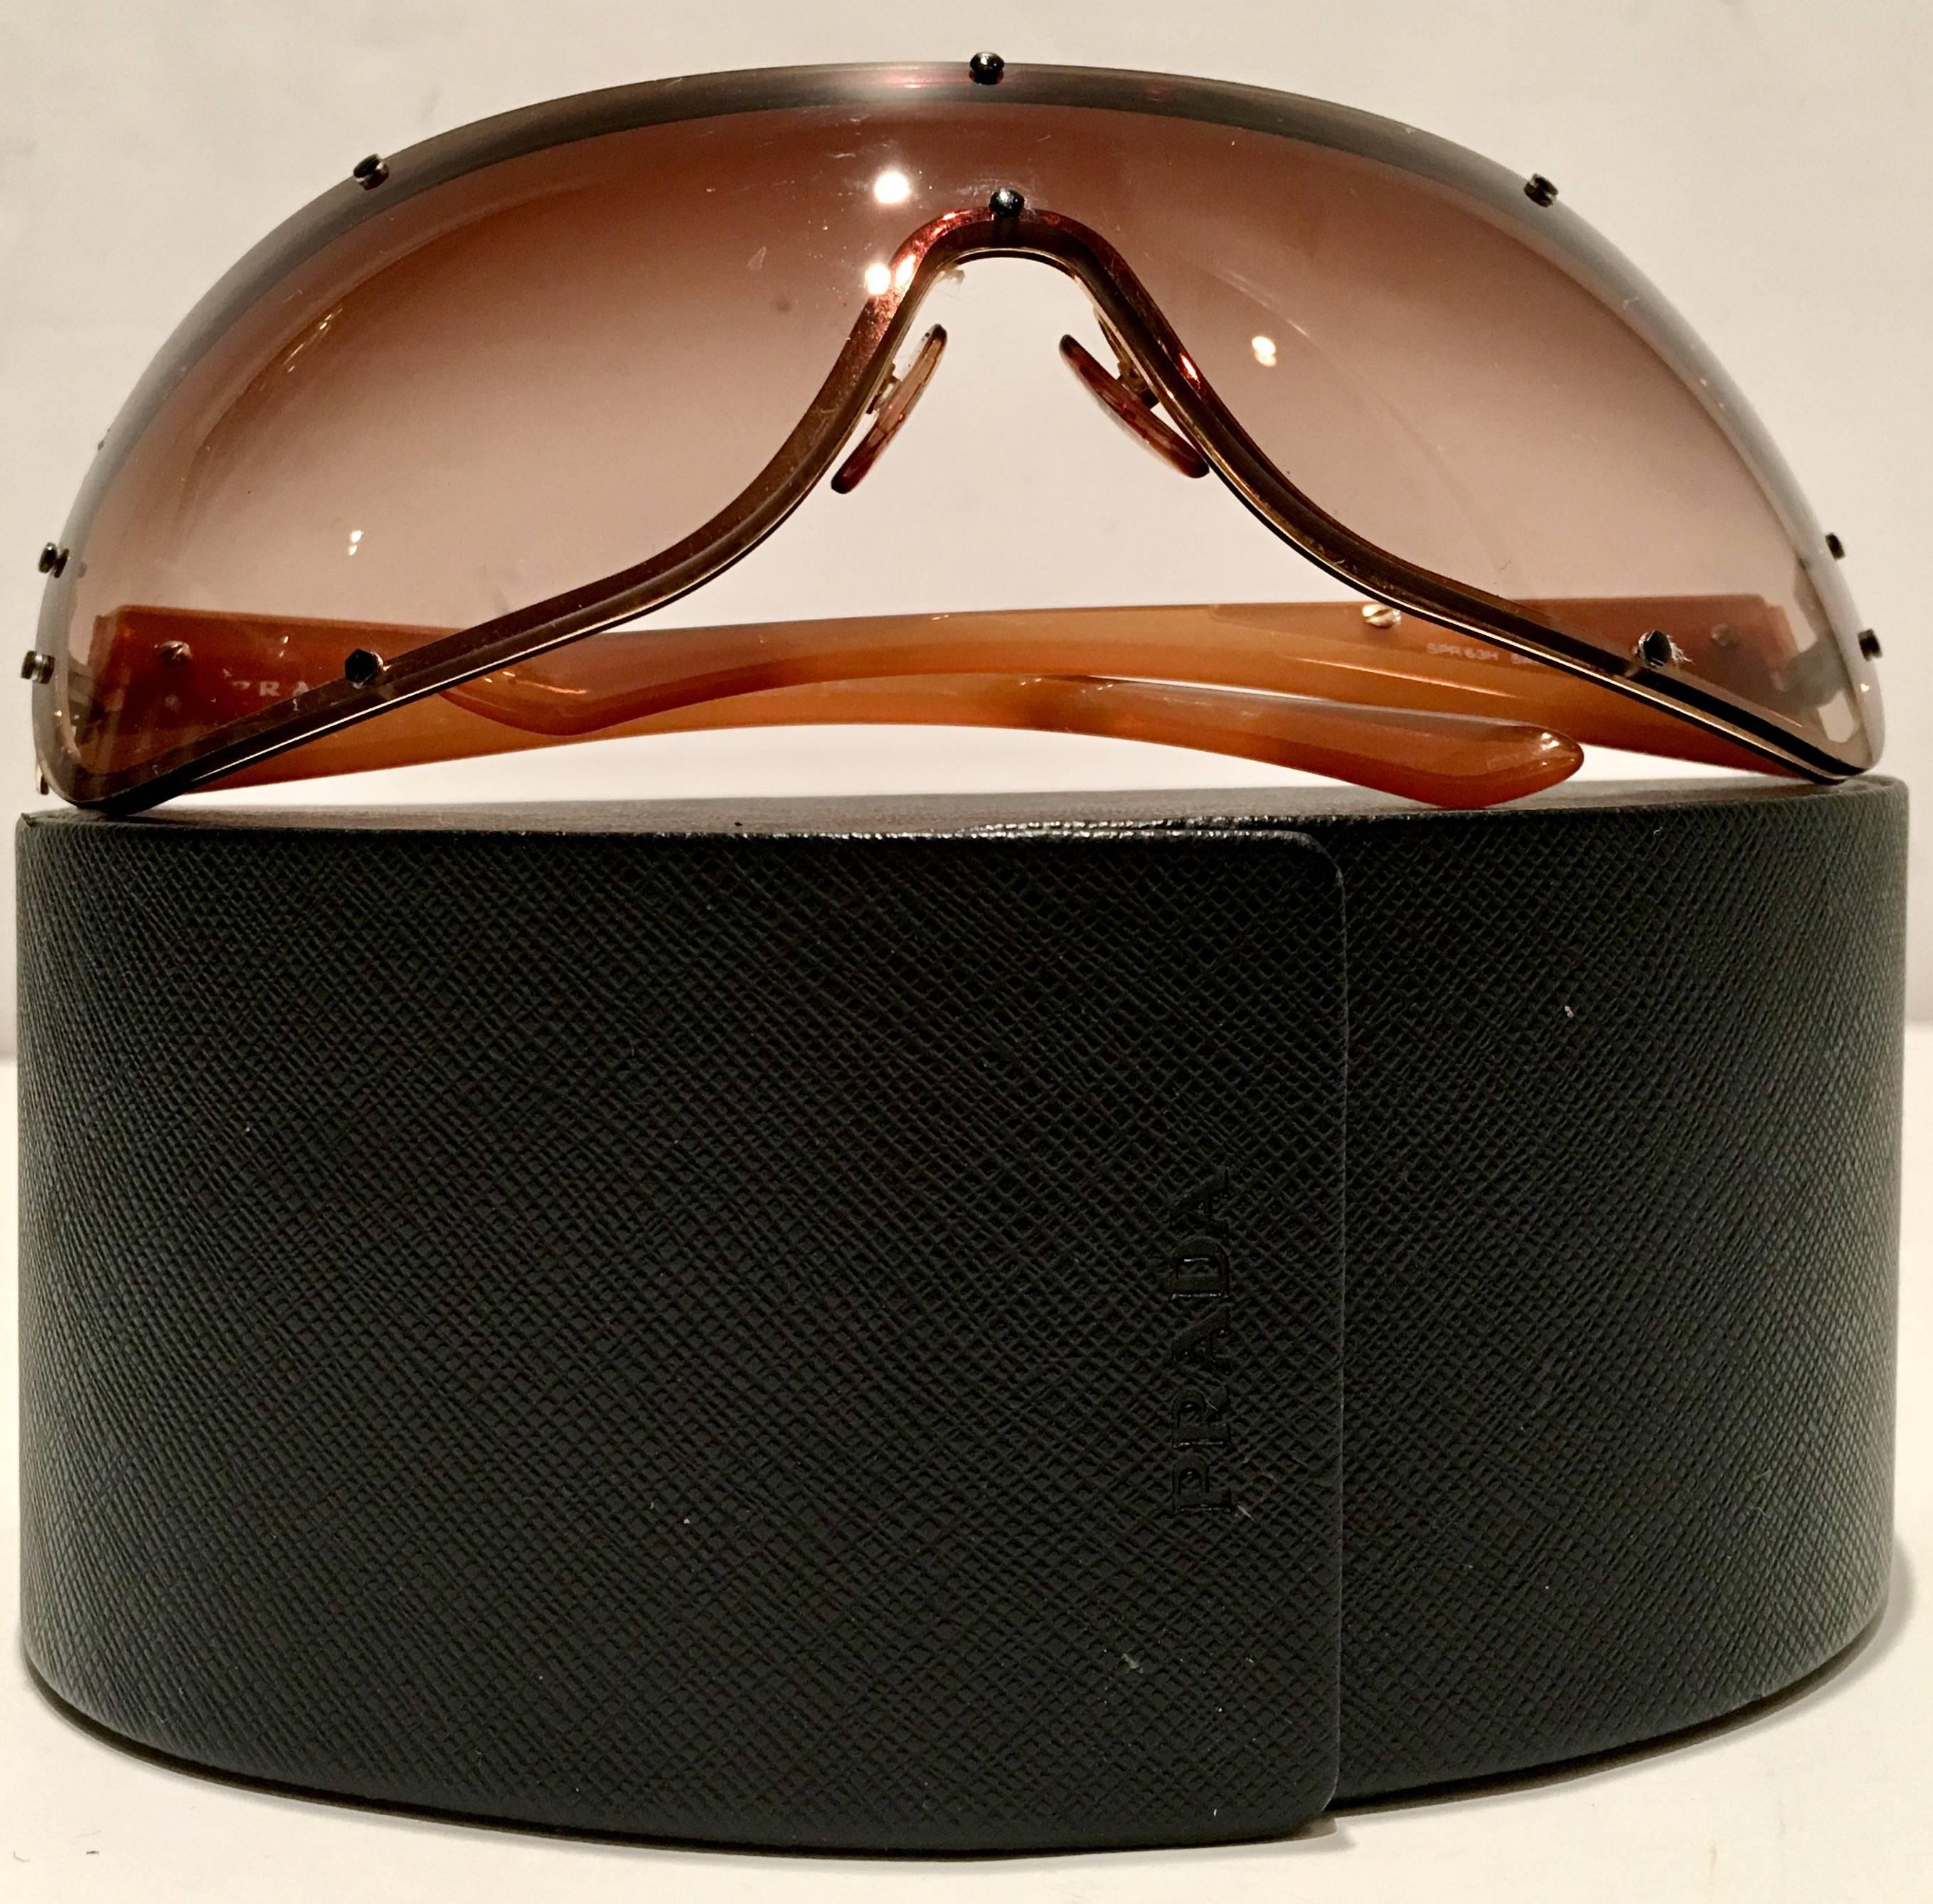 Rare Prada sport gold, butterscotch frame and brown gradient lens shield style sunglasses. Model 63H, Unisex. Includes a black folding Prada protective storage case. Signed on interior of frame, Prada made in Italy.